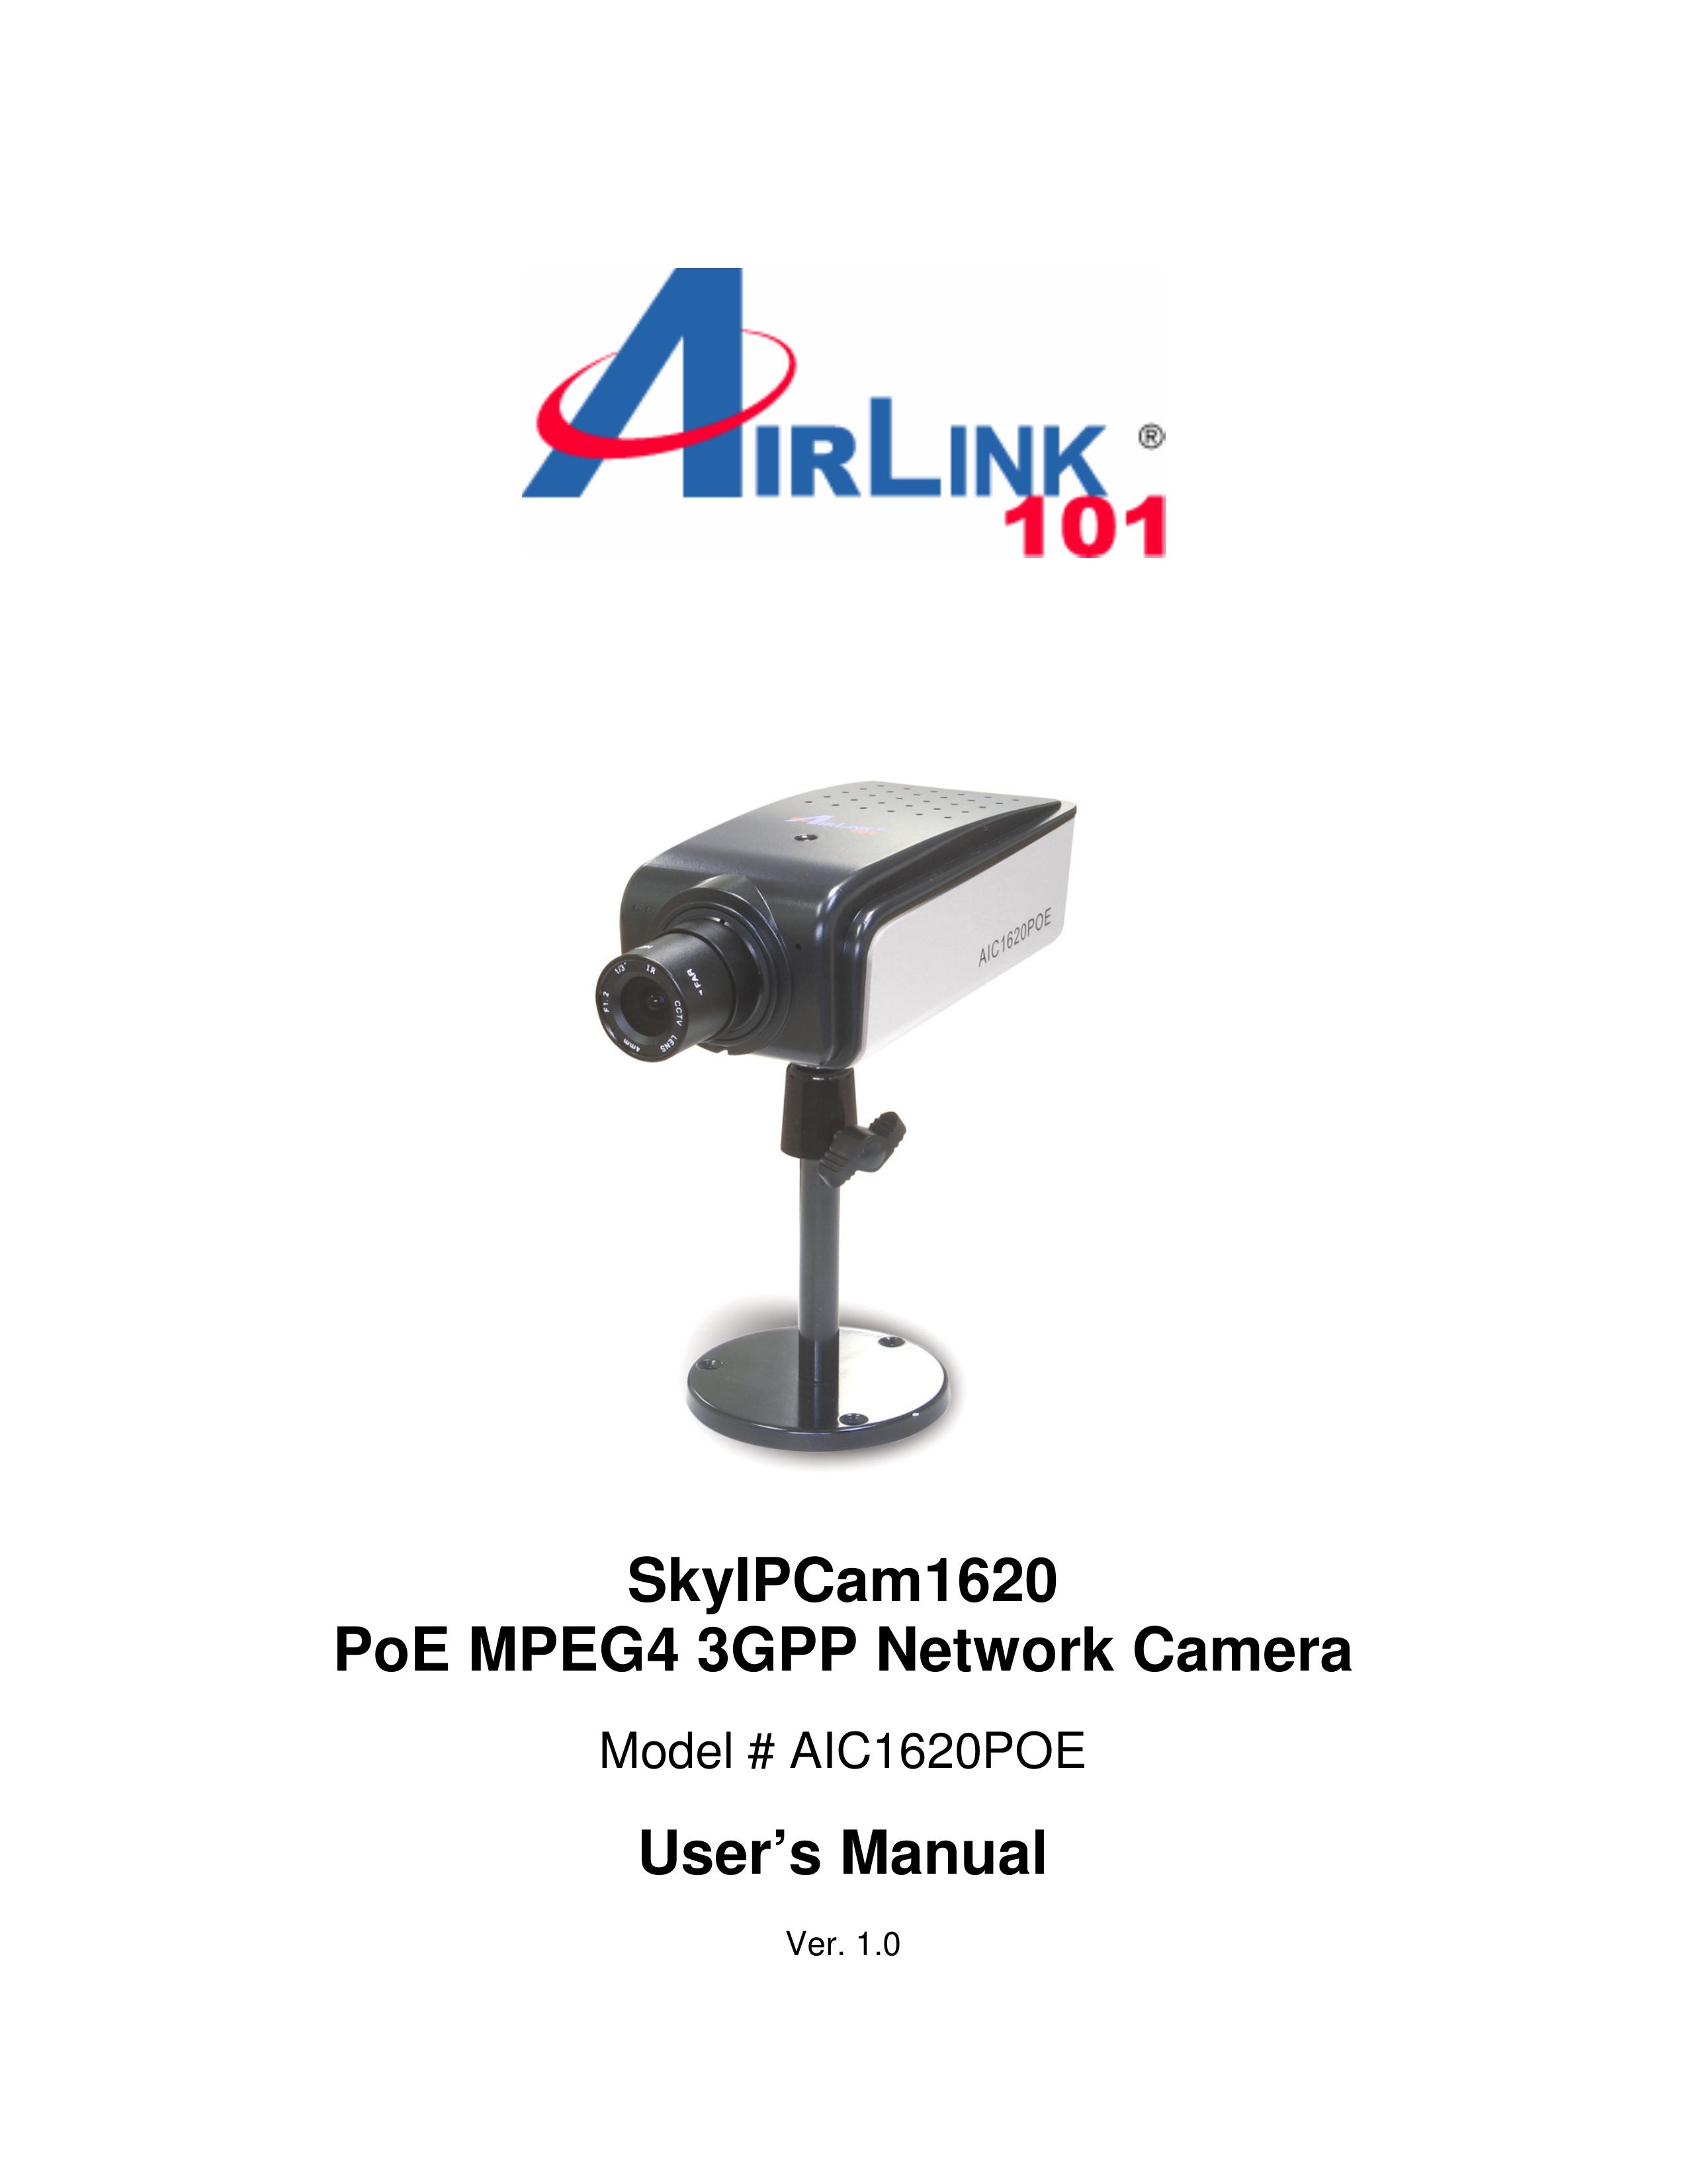 Airlink101 AIC1620POE Security Camera User Manual